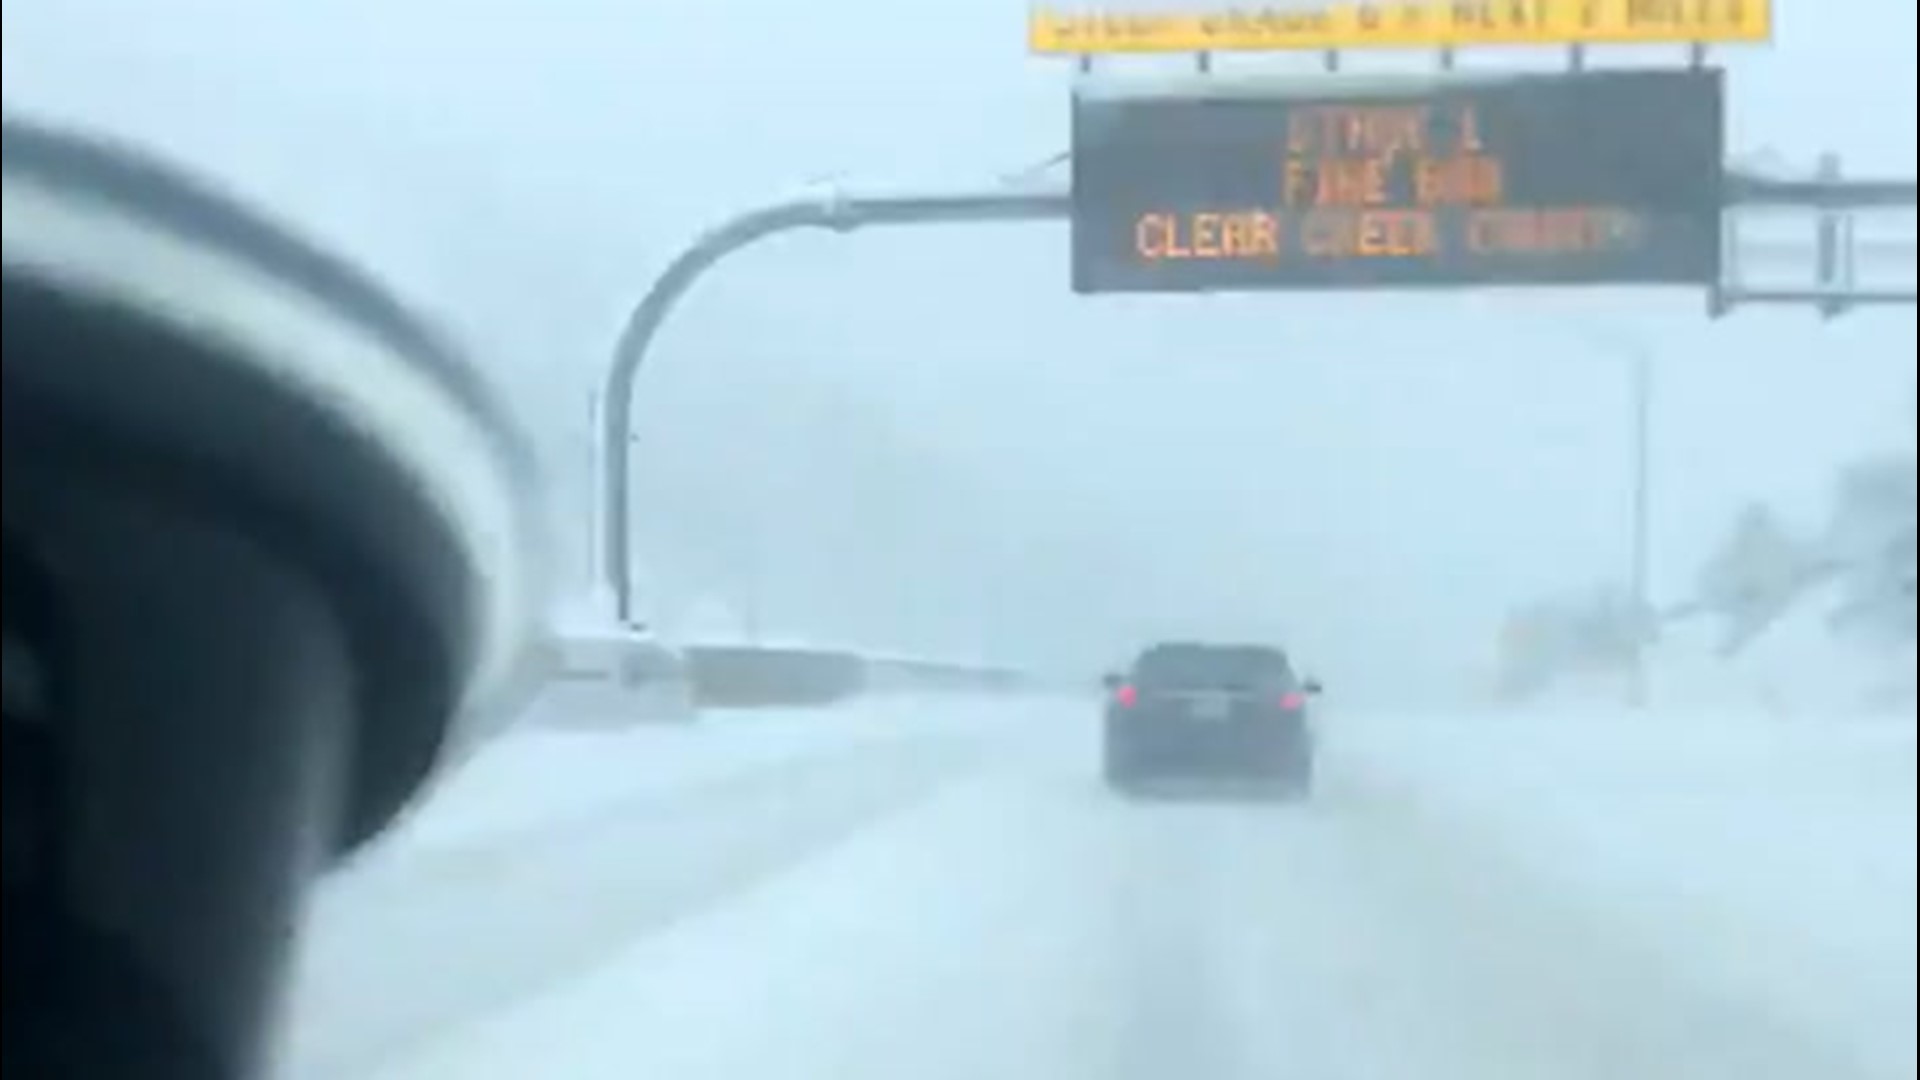 Roads were slick in Idaho Springs, Colorado, on Nov. 24 after some heavy snowfall. The videographer said they spotted upwards of 15 cars stuck and spinning while driving to their destination.